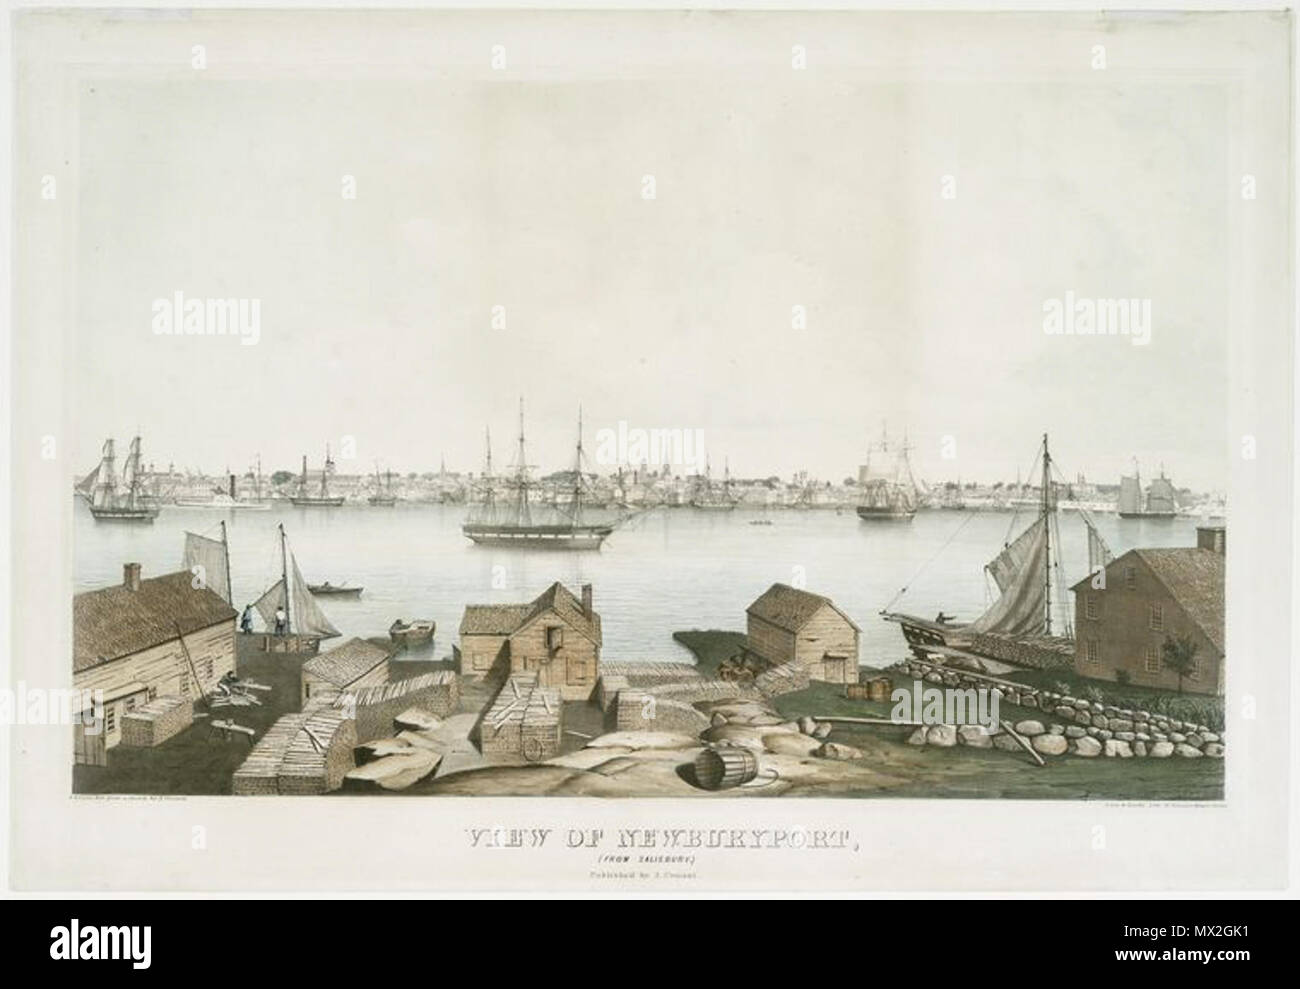 . Image Title: View of Newburyport, (from Salisbury.) Creator(s): Lane, Fitz Hugh, 1804-1865 -- Artist Conant, Alban Jasper, 1821-1915 -- Artist Additional Name(s): Conant, Alban Jasper, 1821-1915 -- Publisher Lane and Scott's Lithography -- Printer Of plates Published Date: [1846] Depicted Date: [1846] Medium: Lithographs -- Hand-colored Specific Material Type: Prints Item Physical Description: 1 print : tinted lithograph with hand coloring ; 40.6 x 64.4 cm. Standard Reference: Deák 546; Stokes P.1846-48-F-54 Source: New York Public Library. I.N. Phelps Stokes Collection of American Historica Stock Photo